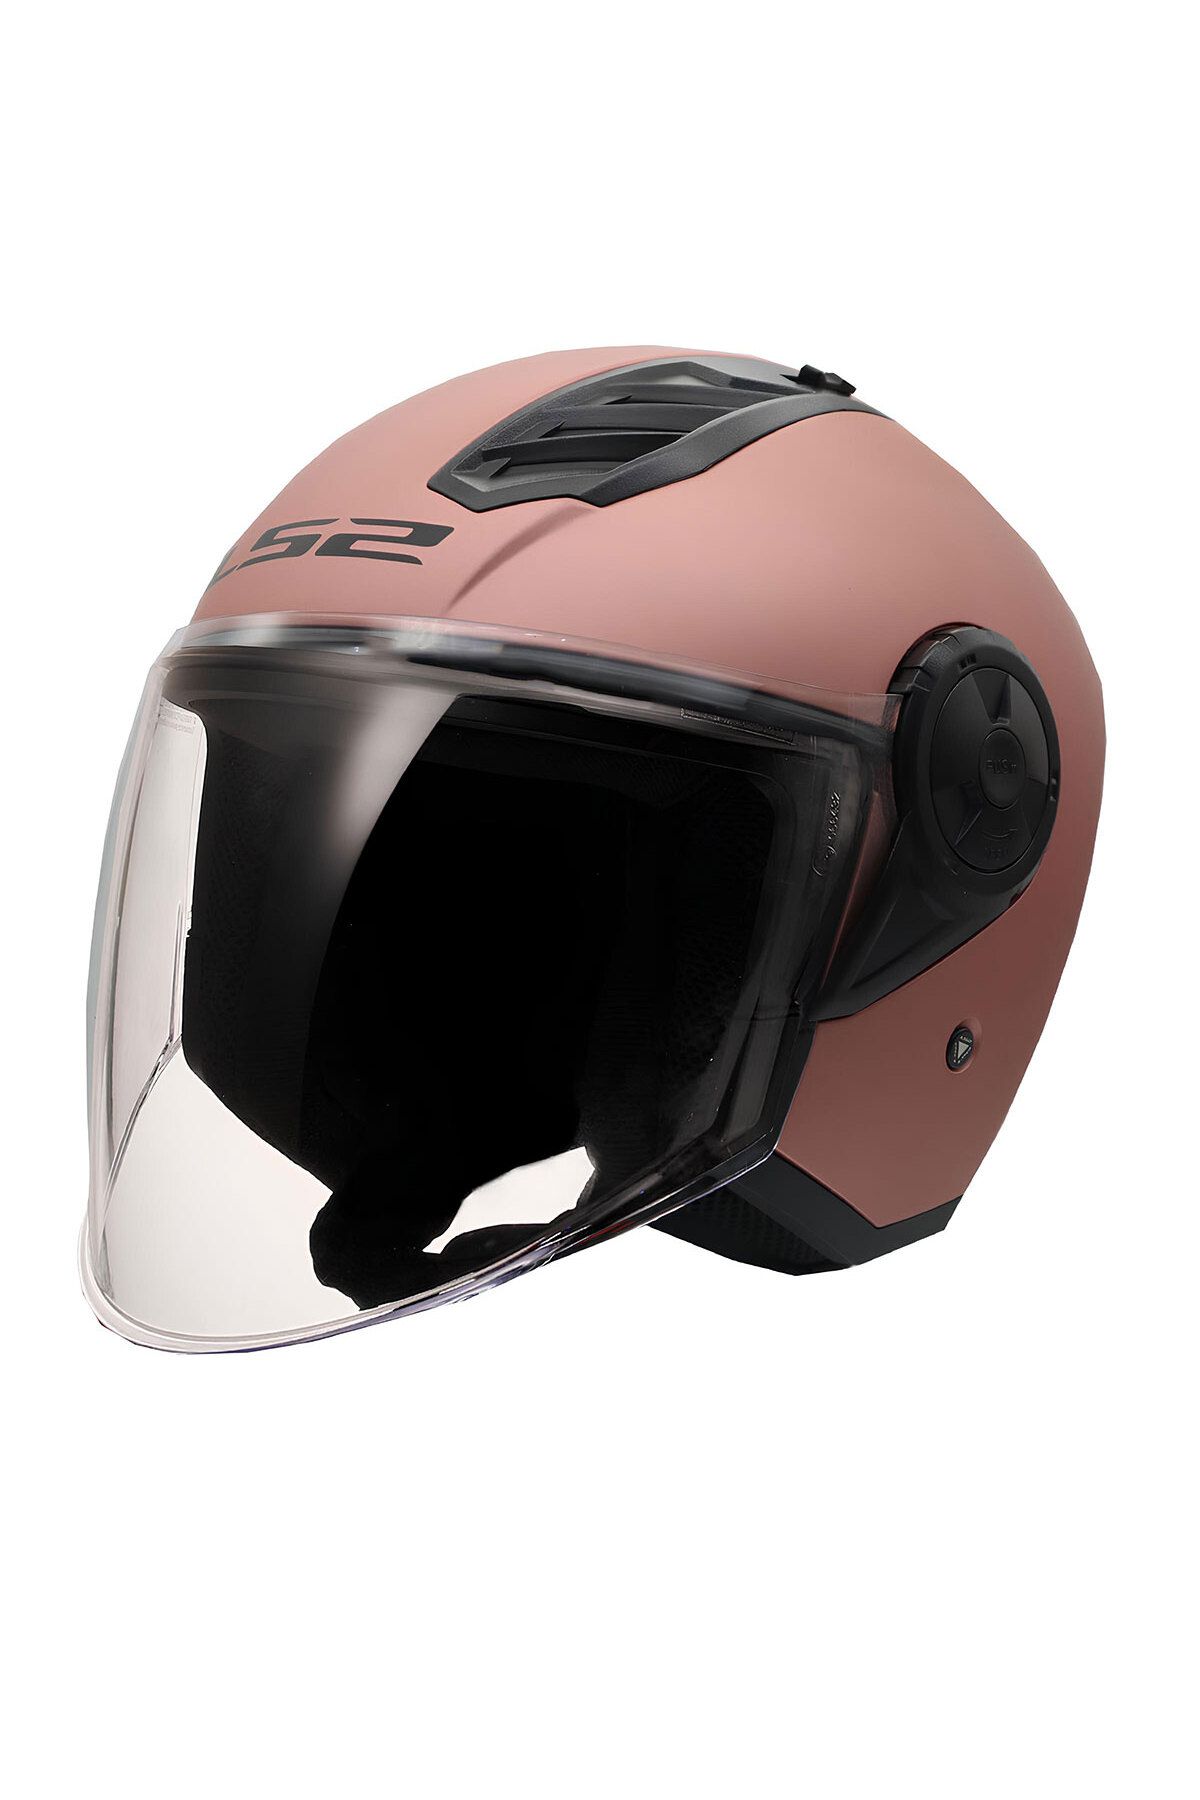 LS2 AIRFLOW 2 ROSE GOLD KASK